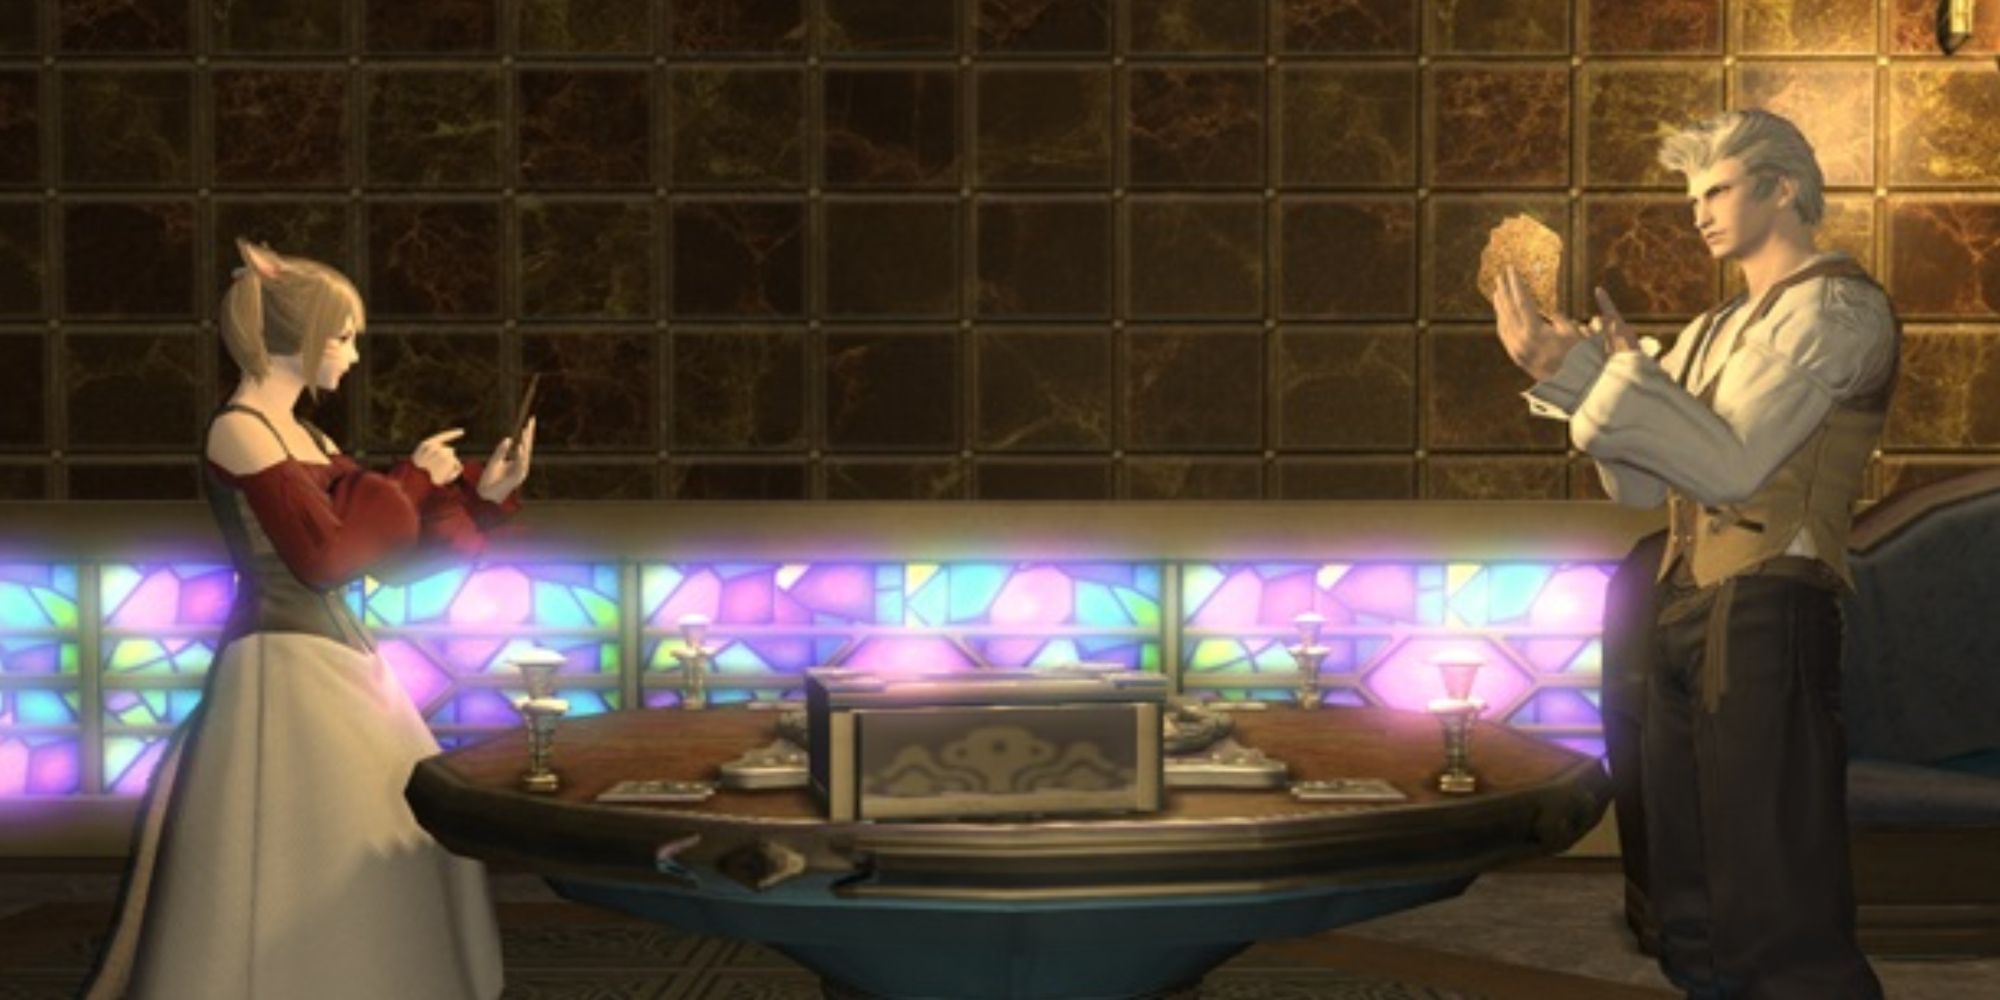 Two people compete in the Triple Triad card game in Final Fantasy 14